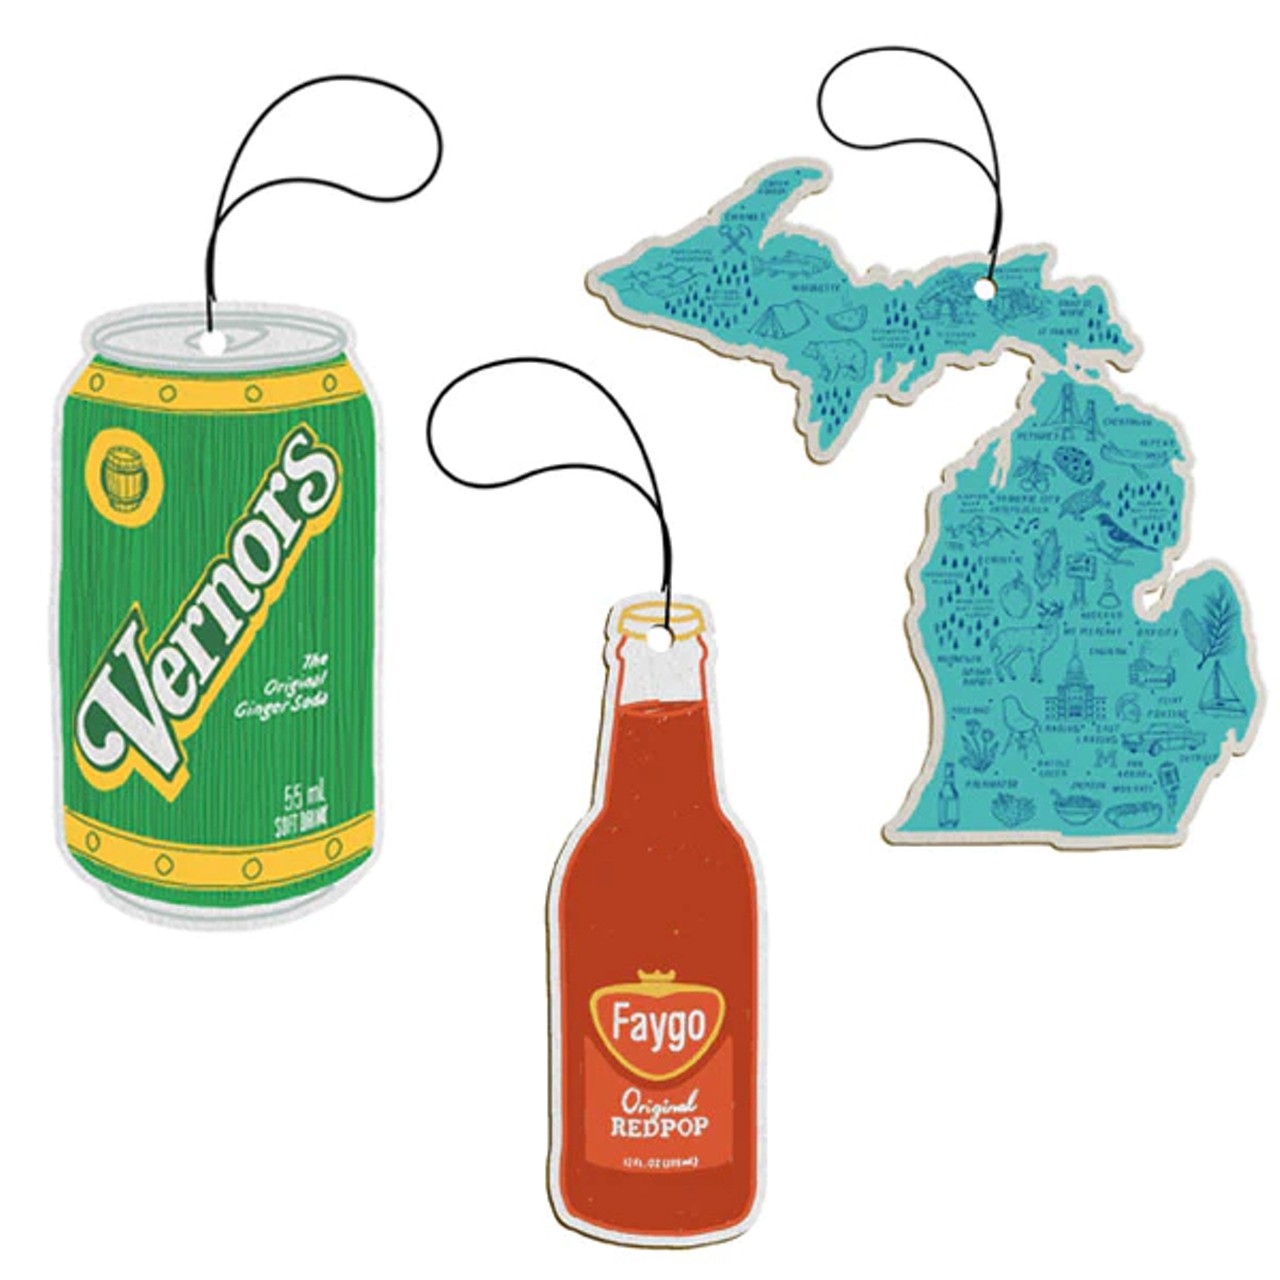 Michigan Air Fresheners
460 W. Canfield St., Detroit; 313-831-9146; 
citybirddetroit.com
City Bird stocks many cute Detroit-themed gifts, but we’re 
digging these Michigan-themed air fresheners, available for 
$5 each, and include scents like fresh water, red pop, ginger 
ale, and pine. Nothing triggers memories like smell, so these
are great for the expat in your life who misses home. —Lee 
DeVito